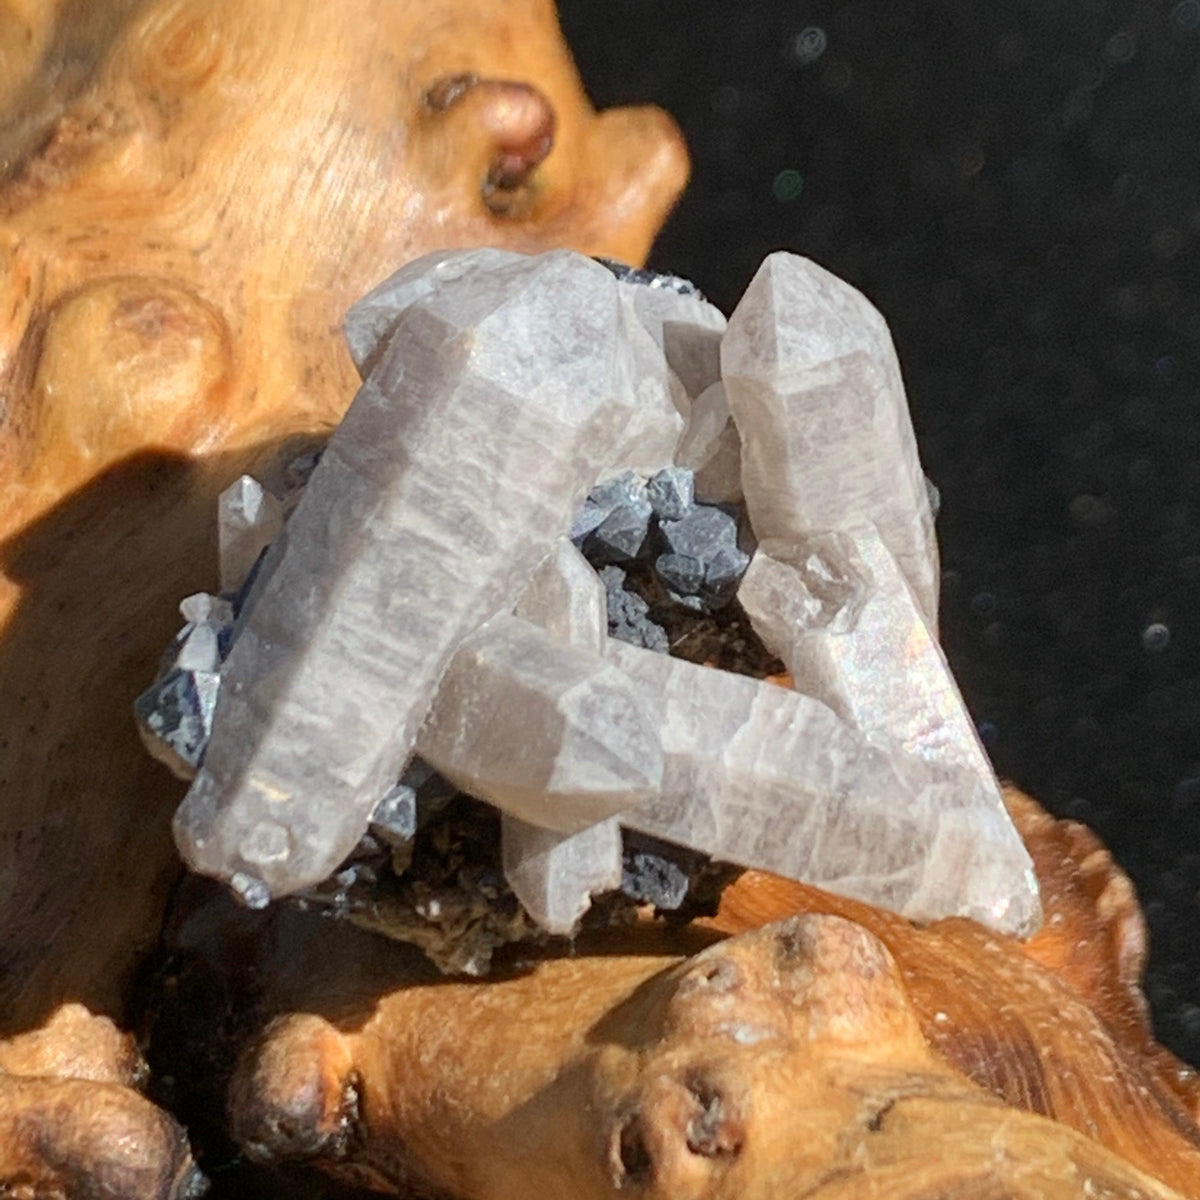 medium and small brookite crystals on a smokey quartz point cluster sitting on driftwood for display